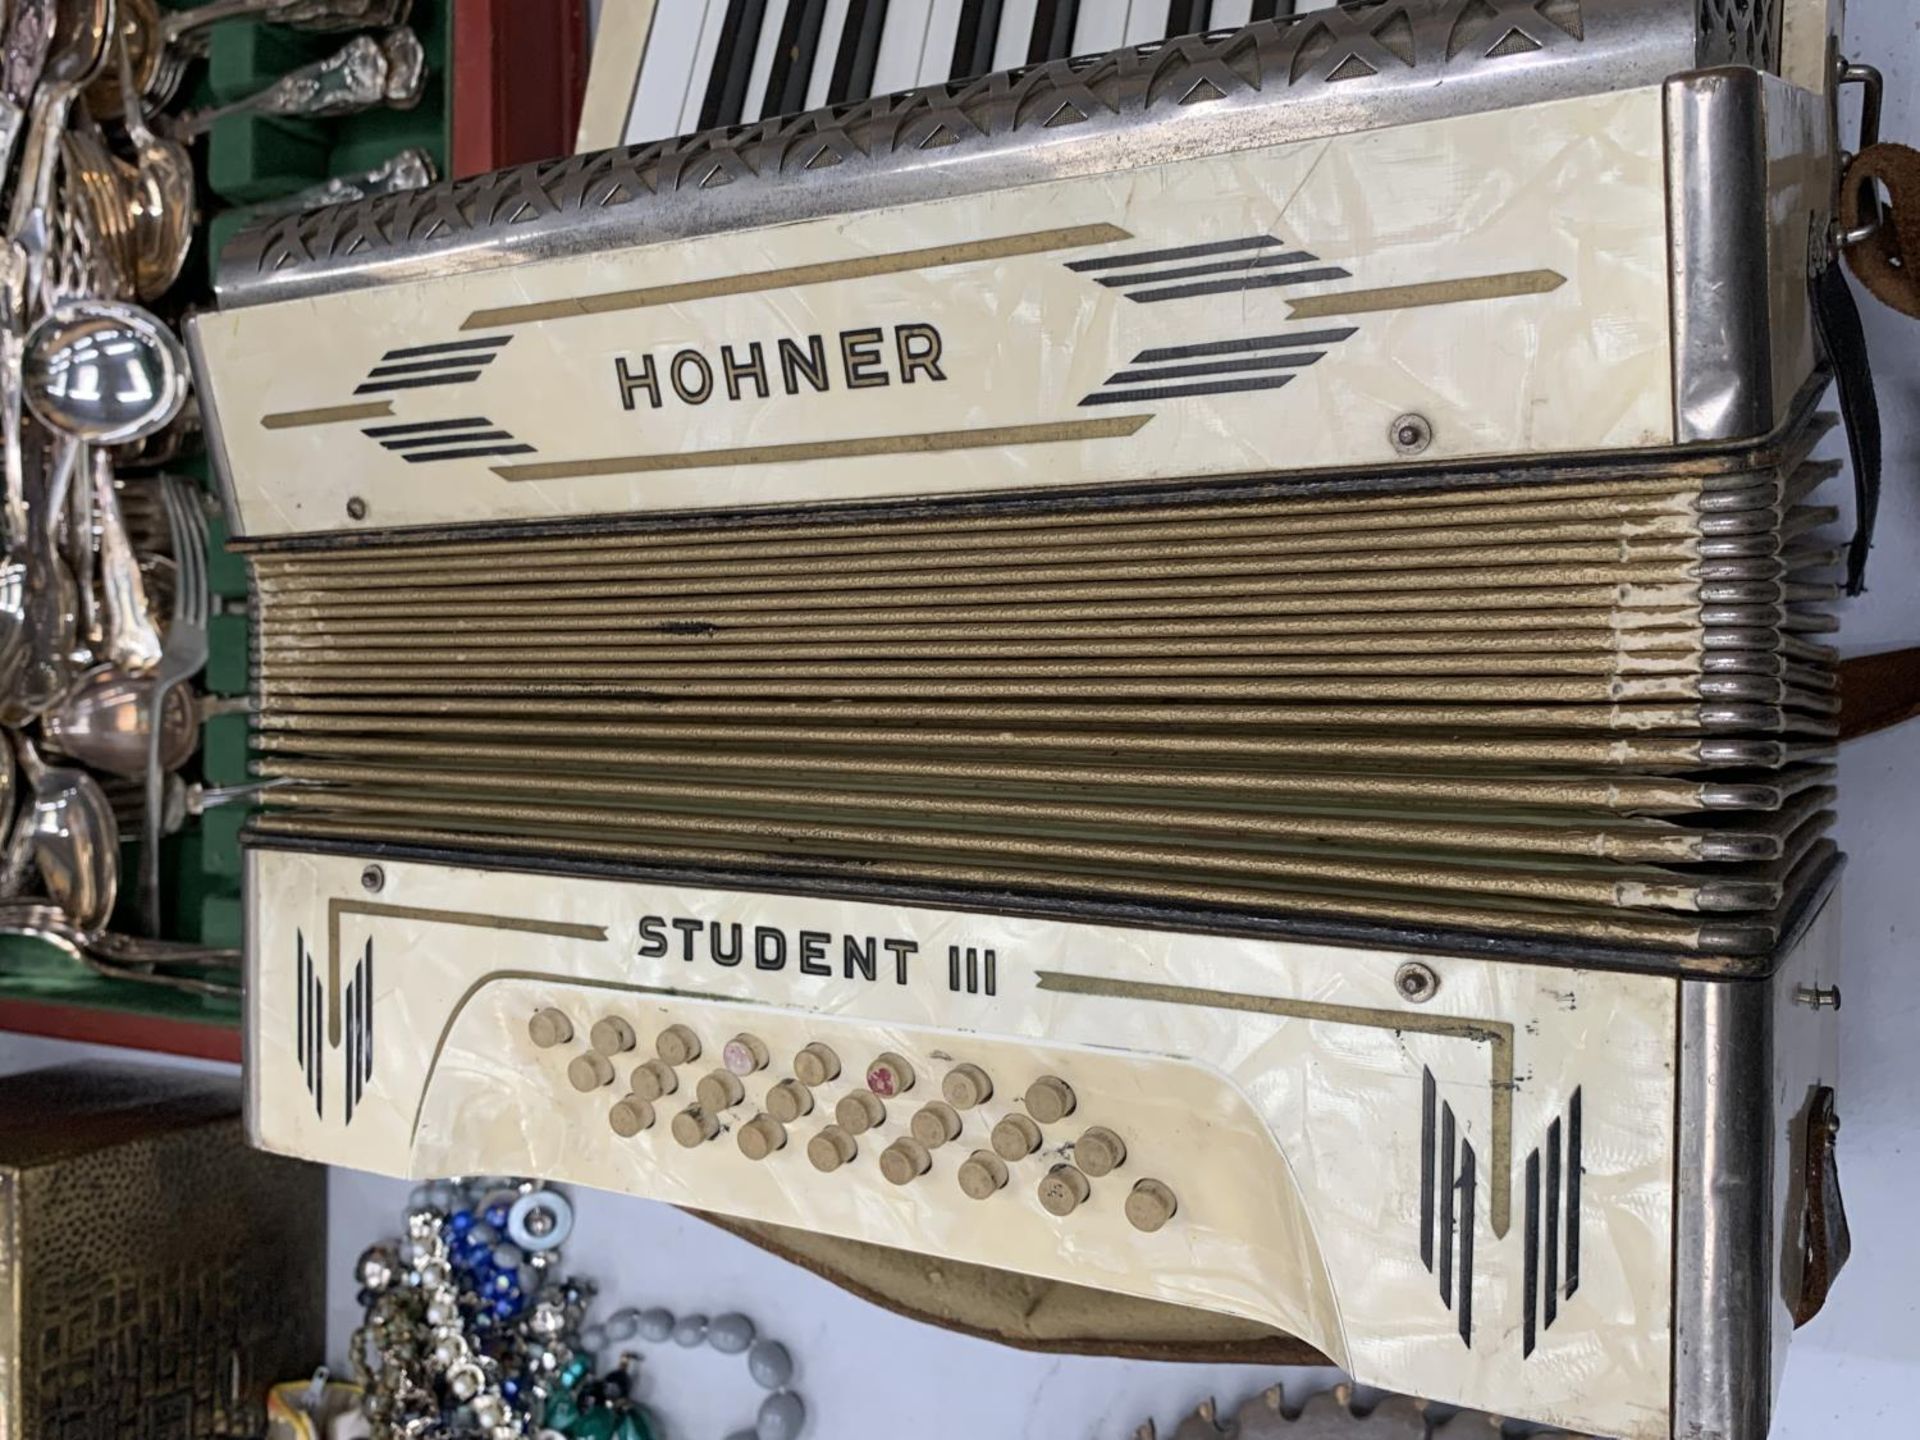 A HOHNER STUDENT III ACCORDIAN - Image 2 of 4